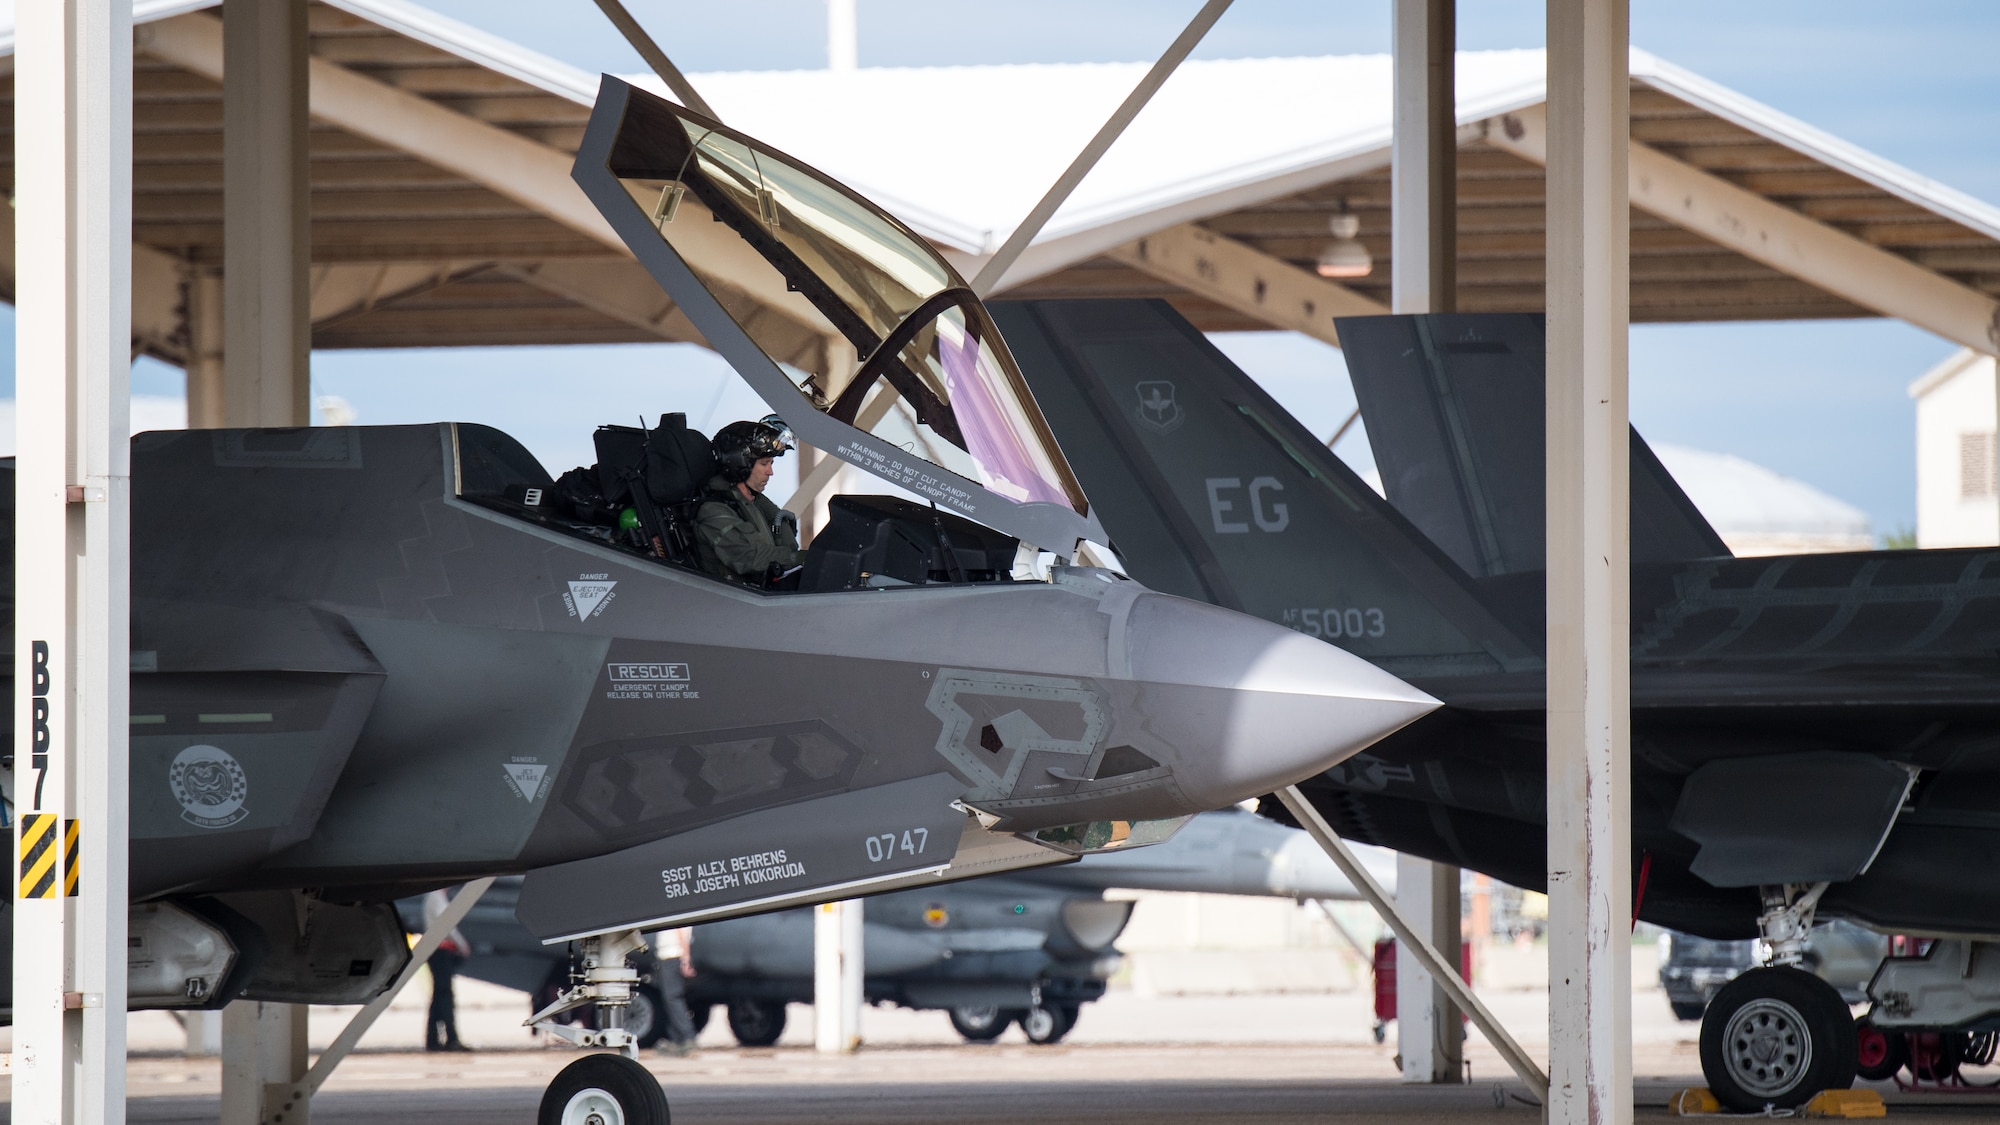 Aircrew from Eglin Air Force Base, Fla., prepare an F-35 Lightning for takeoff at Barksdale Air Force Base, La., Oct. 12, 2018. The aircraft evacuated to Barksdale to avoid possible damage from Hurricane Michael. (U.S. Air Force photo by Airman 1st Class Lillian Miller)